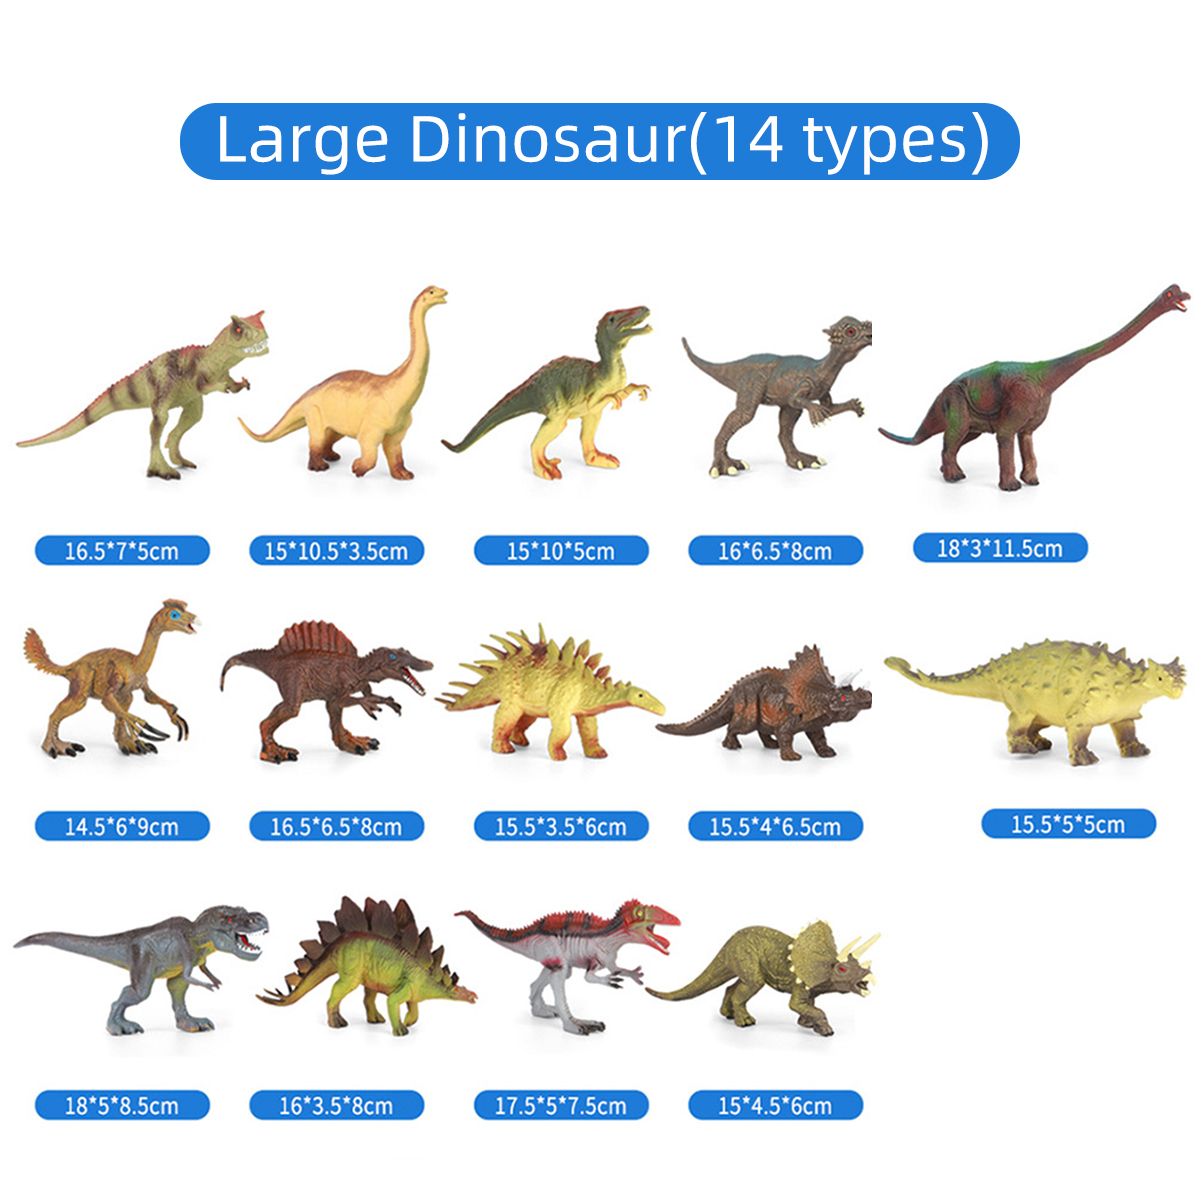 2833346365Pcs-Multi-style-Diecast-Dinosaurs-Model-Play-Set-Educational-Toy-with-Play-Mat-for-Kids-Ch-1836203-15